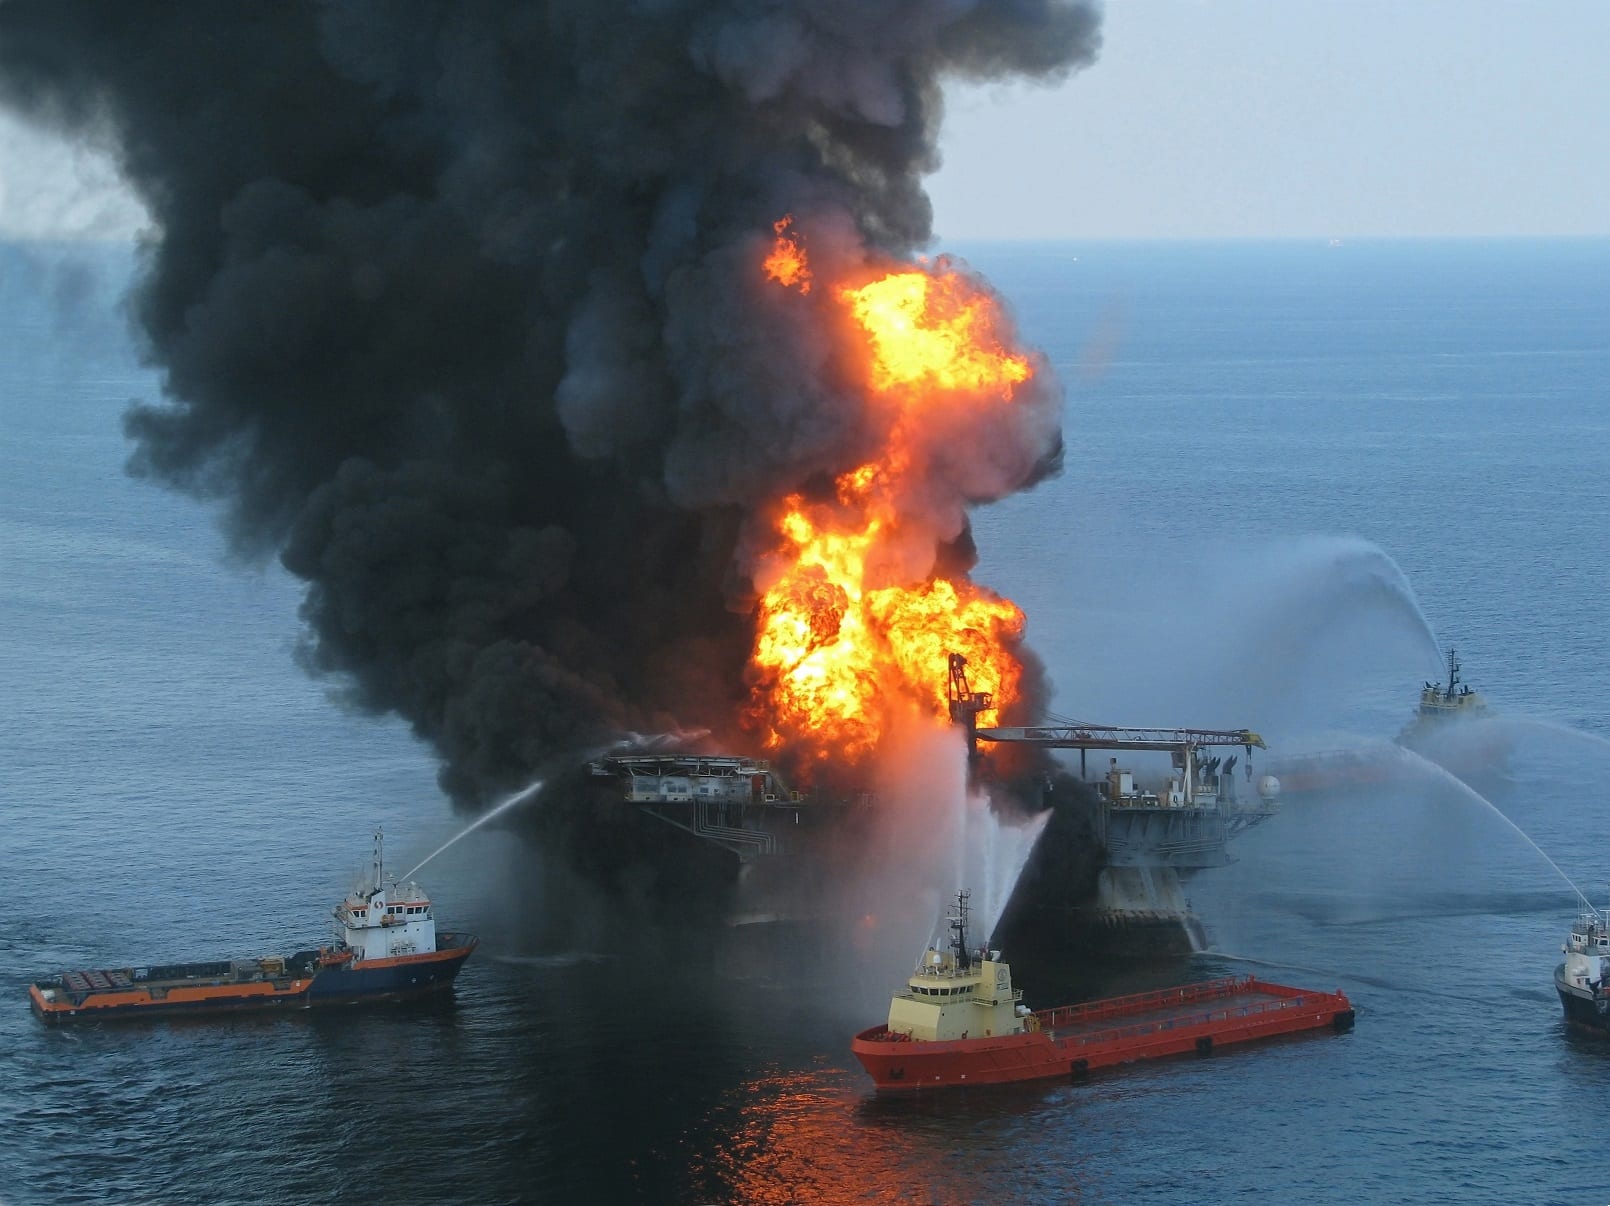 The U.S. Coast Guard fights to put out the Deepwater Horizon fire.